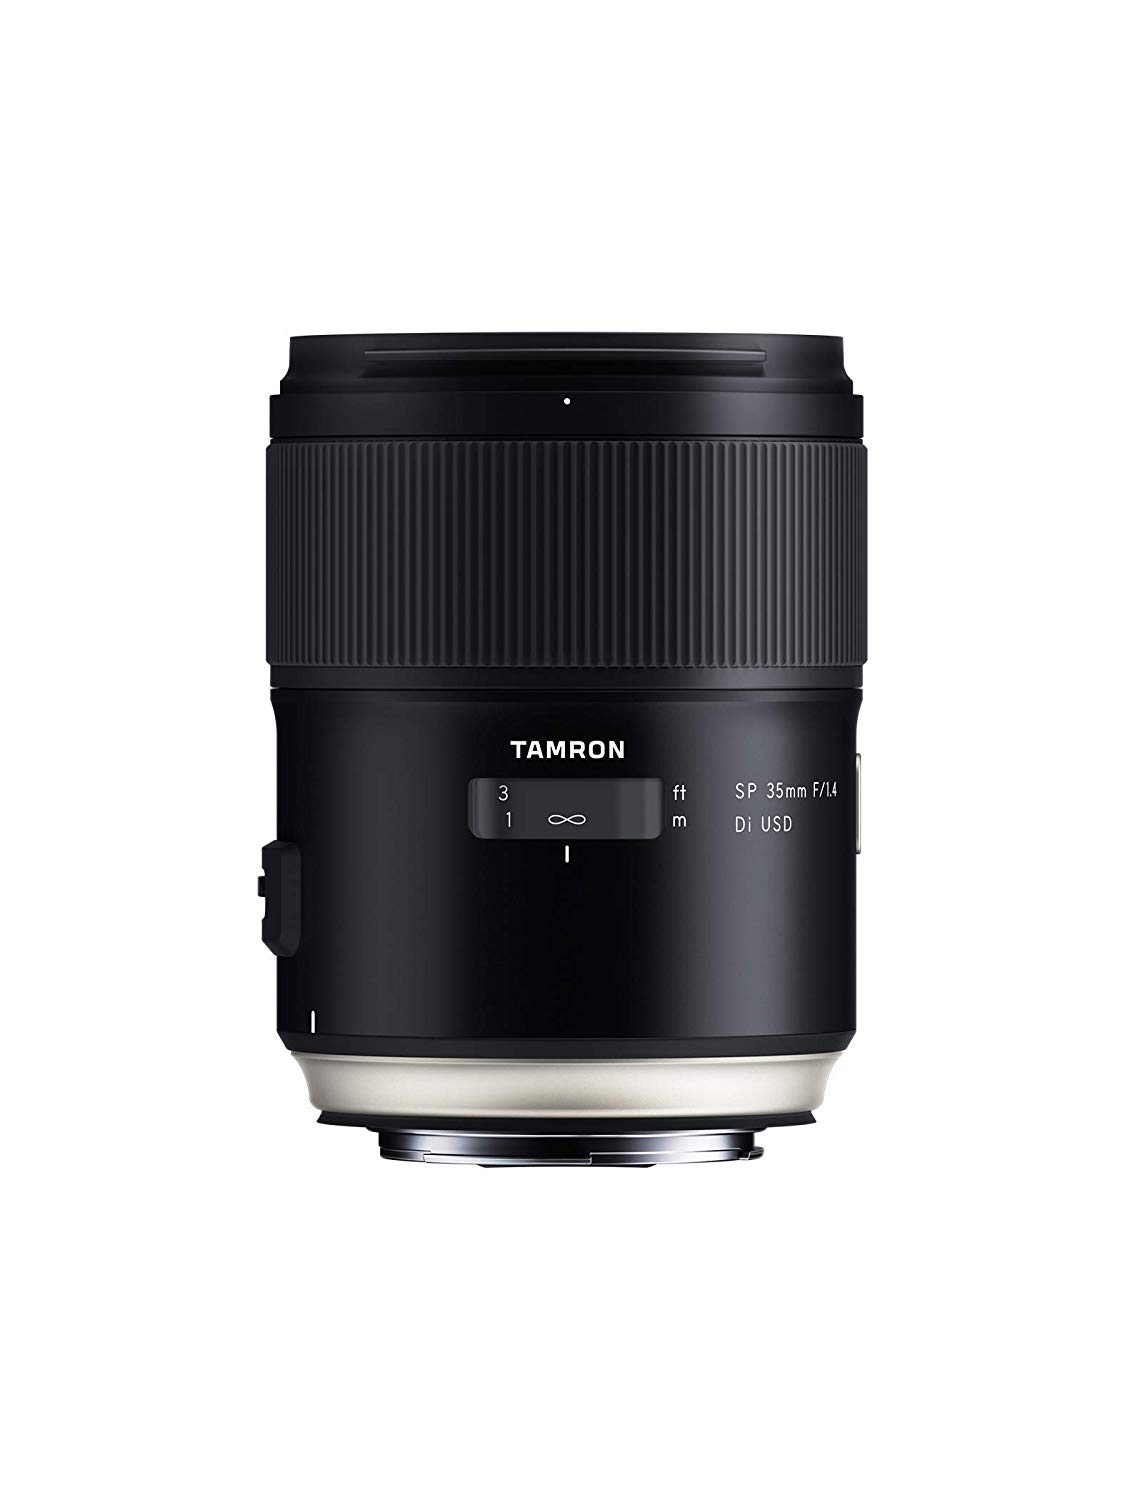 Tamron SP 35mm f/1.4 di USD Lens for Canon EF